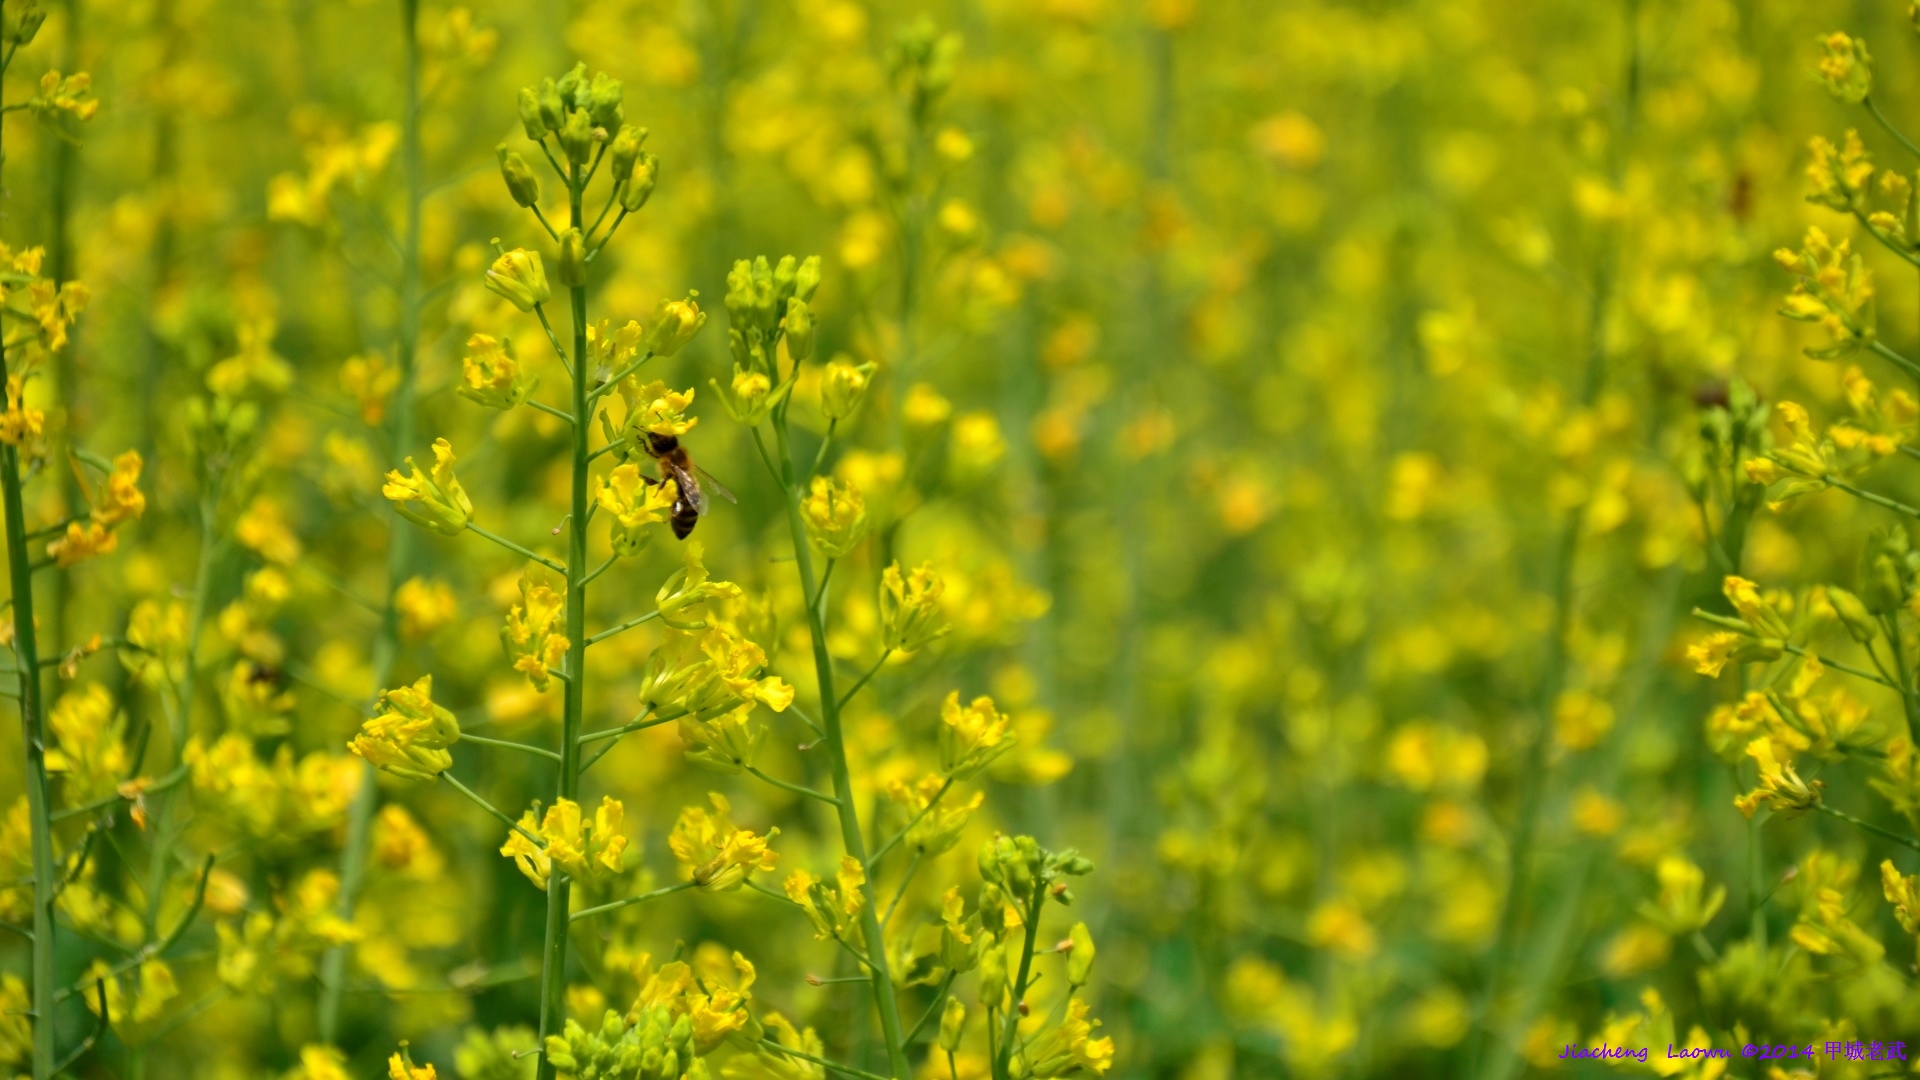 Canola flowers and bees from Laowu's old home yard at Lifeng